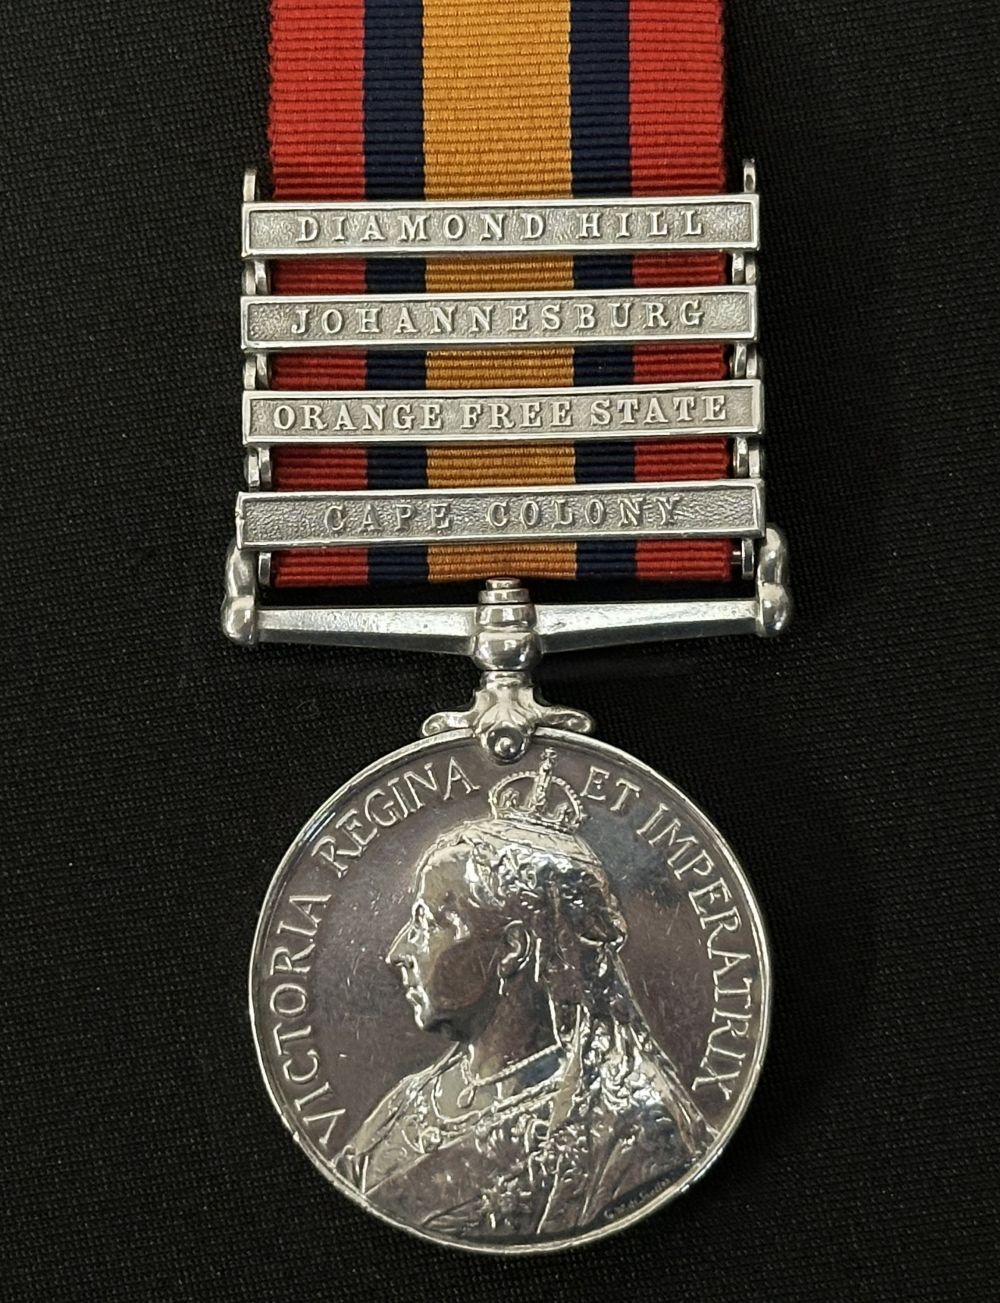 Queens South Africa Medal with Diamond Hill, Johannesburg, Orange Free Stae and Cape Colony